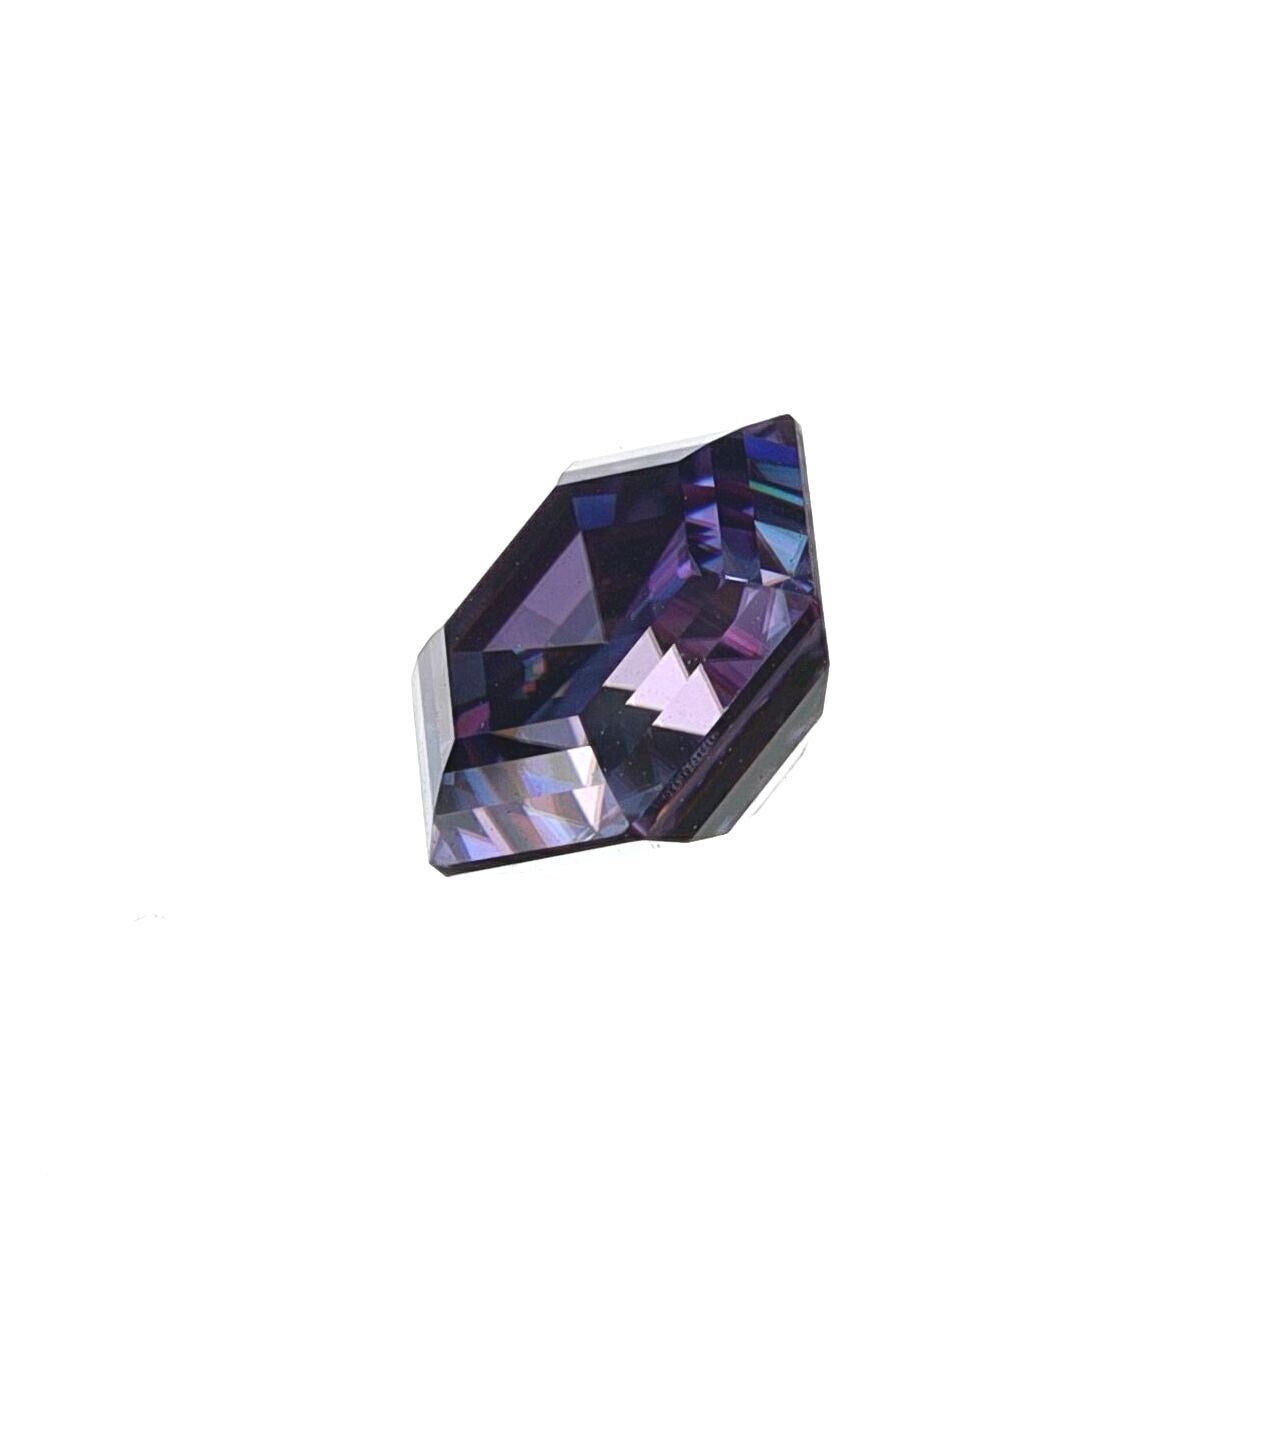 Moissanite imperial purple color certified 2ct hexagon cut gemstone (7mm) - unique gra certified jewelry find